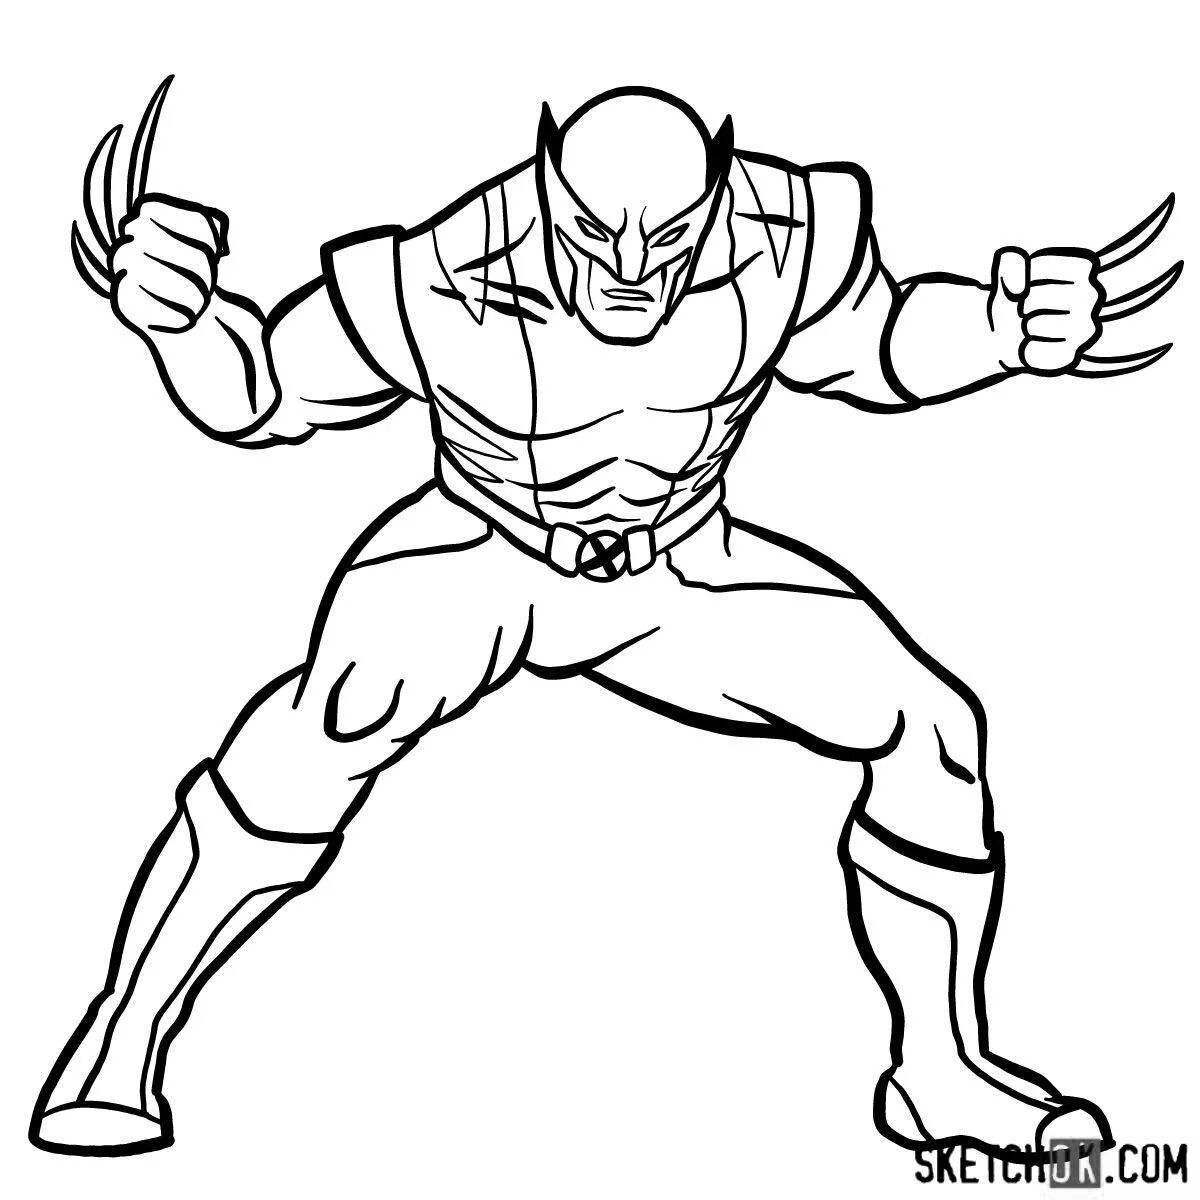 Colorful wolverine coloring book for kids